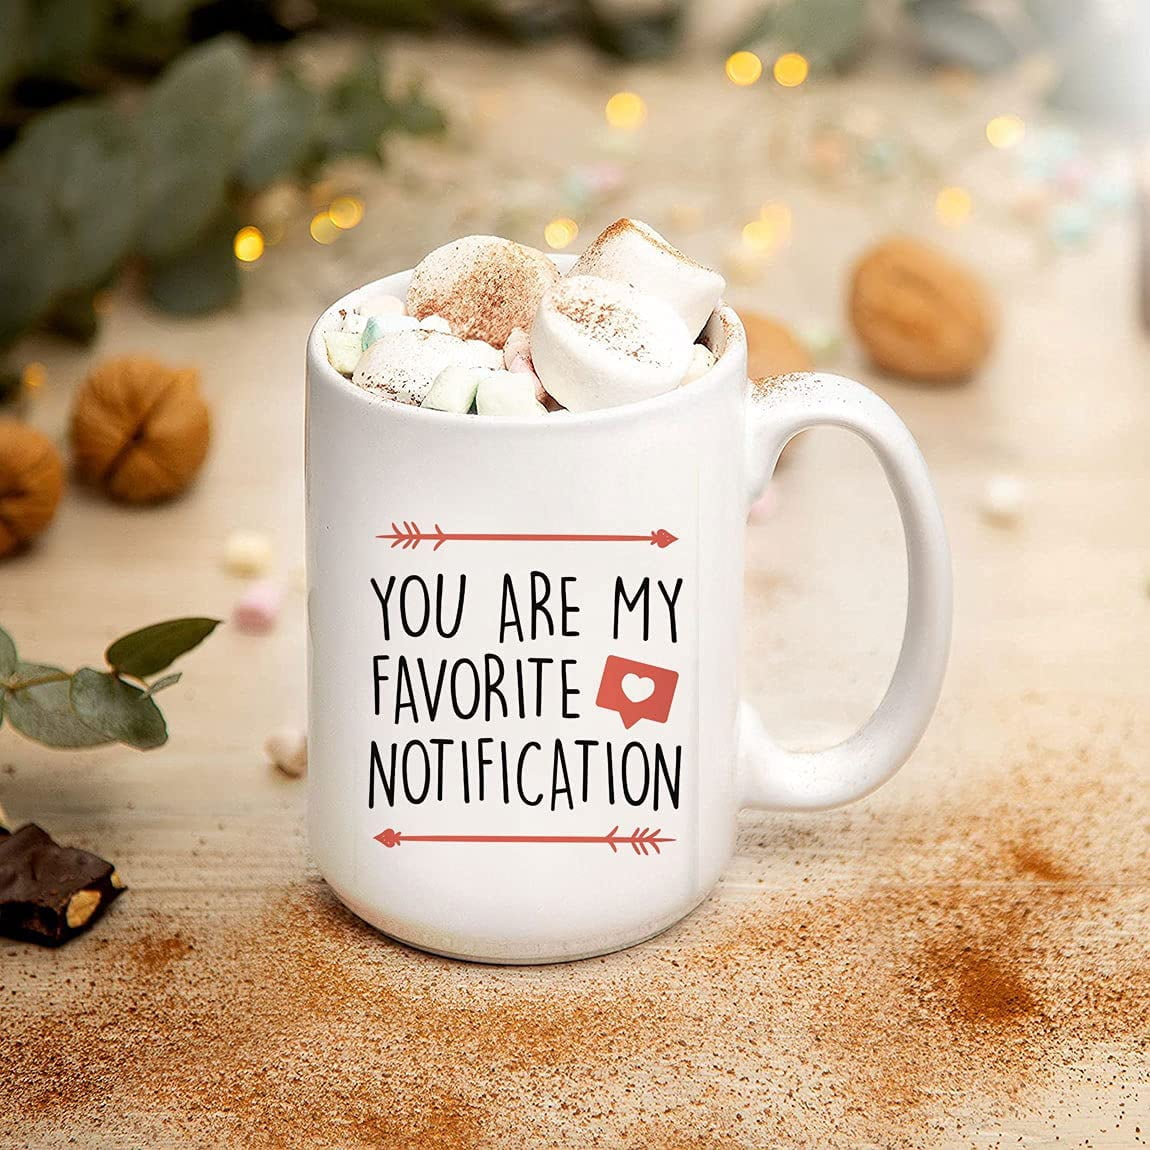 Personalized Funny Gifts For Him, Funny Boyfriend Gift, Boyfriend Mug,  Funny Coffee Mug, Personalized Gift, Personalized Mugs, Boyfriend Birthday  Gifts, Ceramic Novelty Coffee Mug, Tea Cup, Gift Pres - Walmart.com